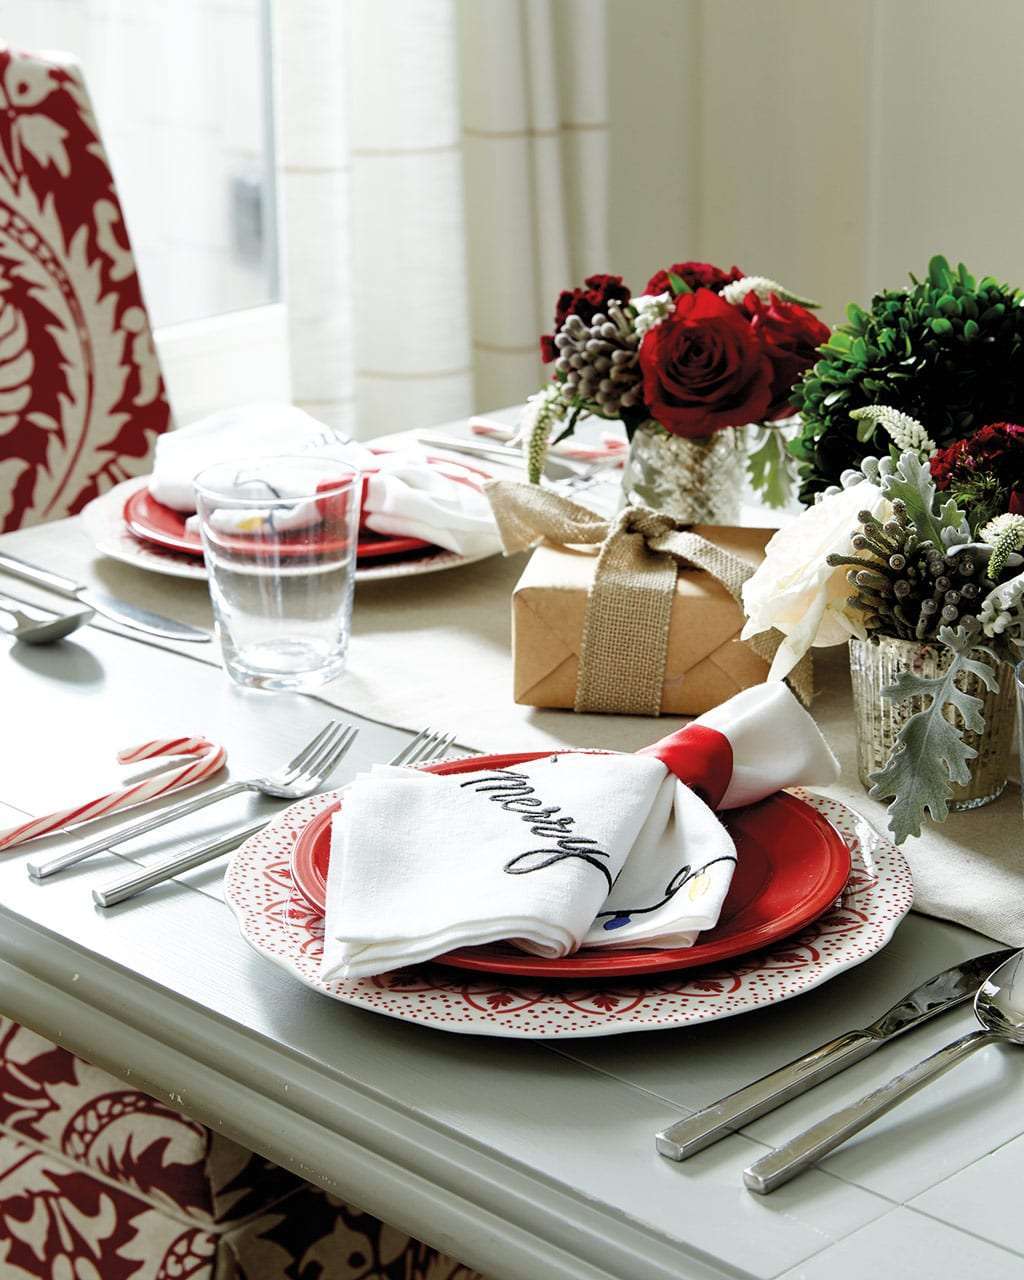 Inspired by a red and green color palette, we set this whimsical Christmas table